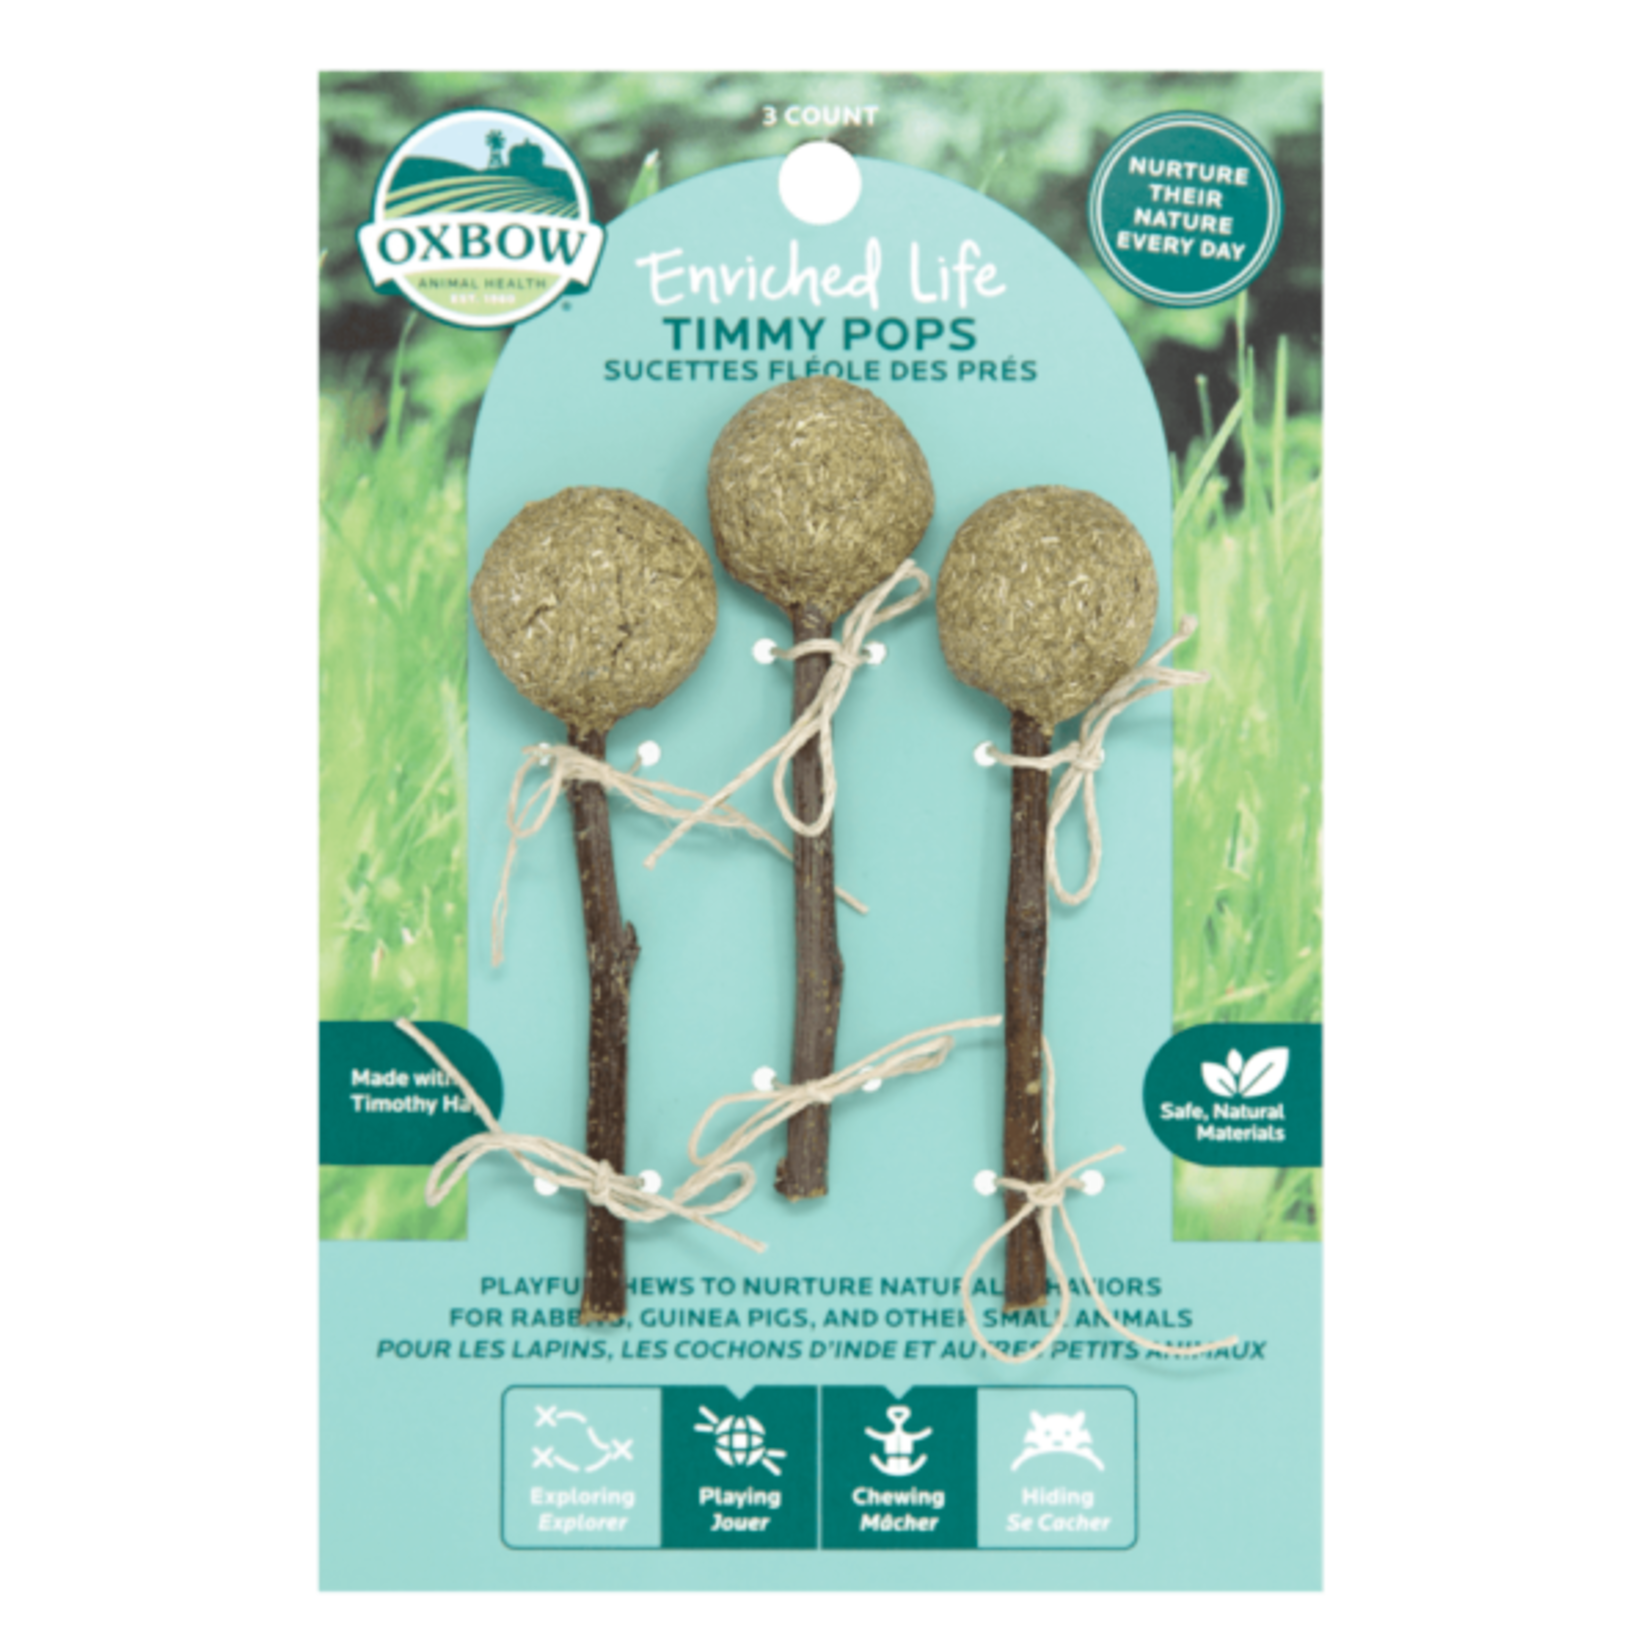 Oxbow Oxbow Enriched Life Timmy Pops Small Animal Chew